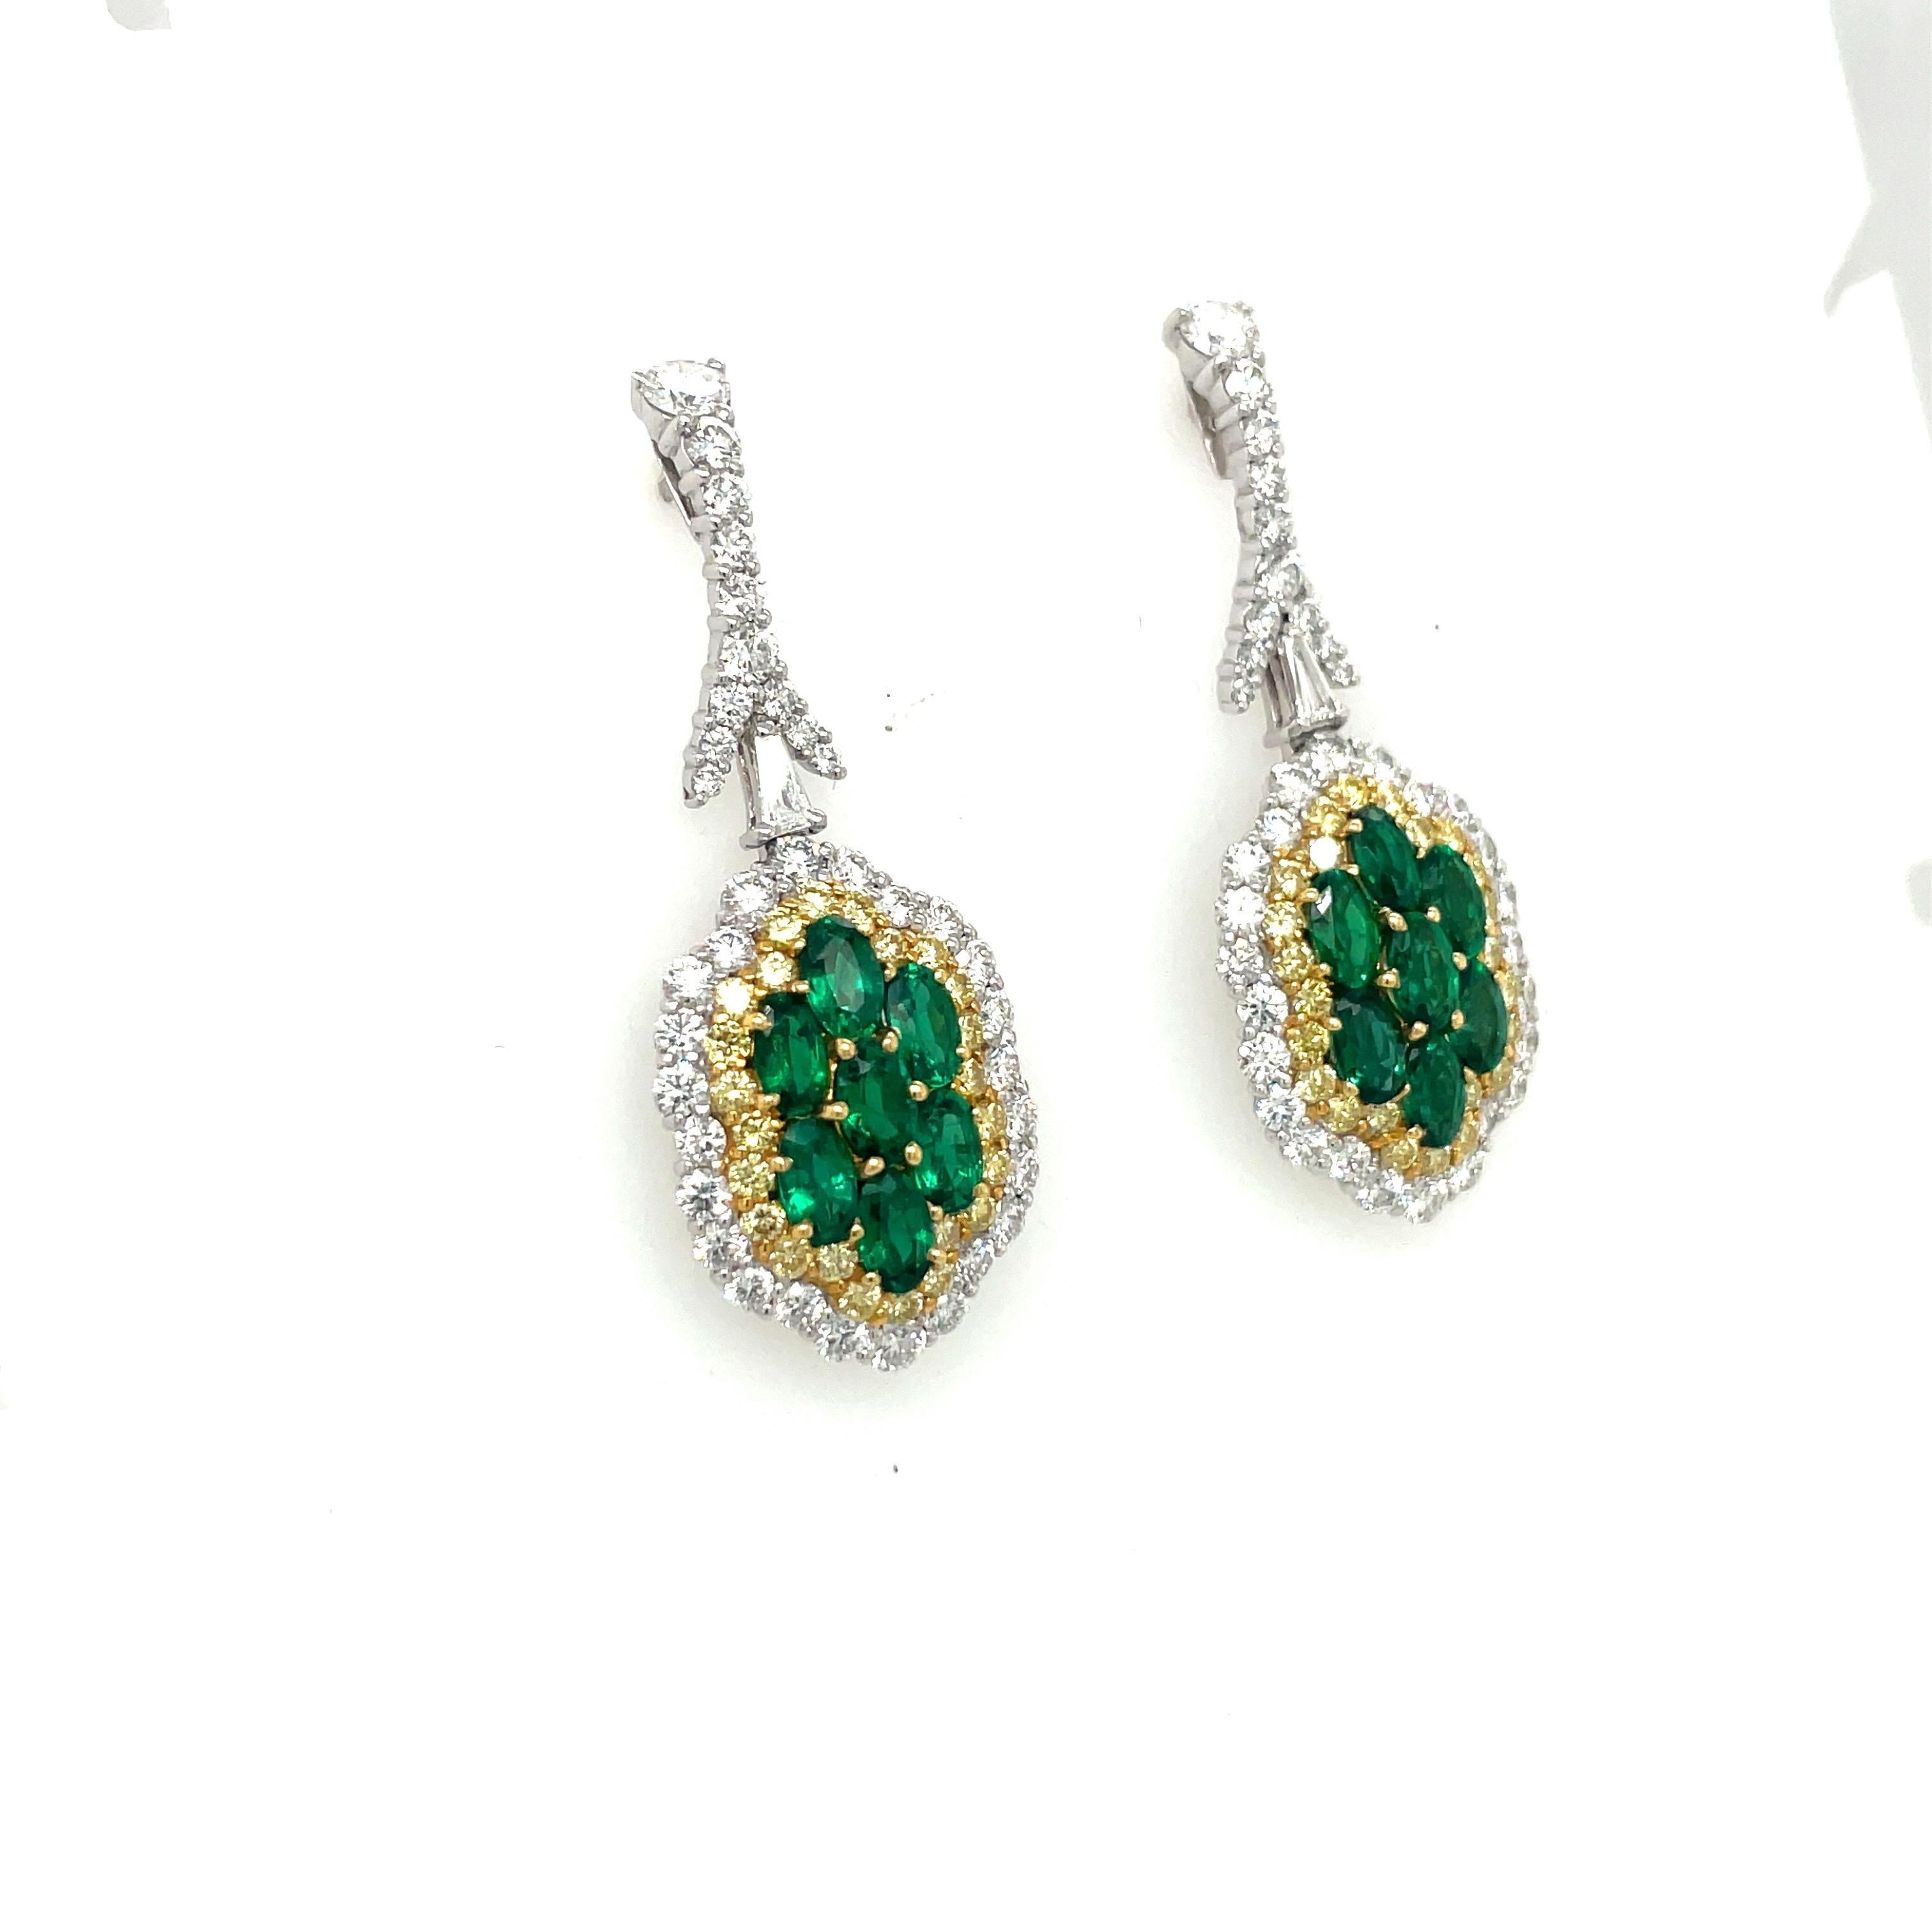 Plat/18KT YG 3.00Ct Emerald Earrings with 2.66Ct Diamonds 1.07Ct Yellow Diamonds For Sale 1